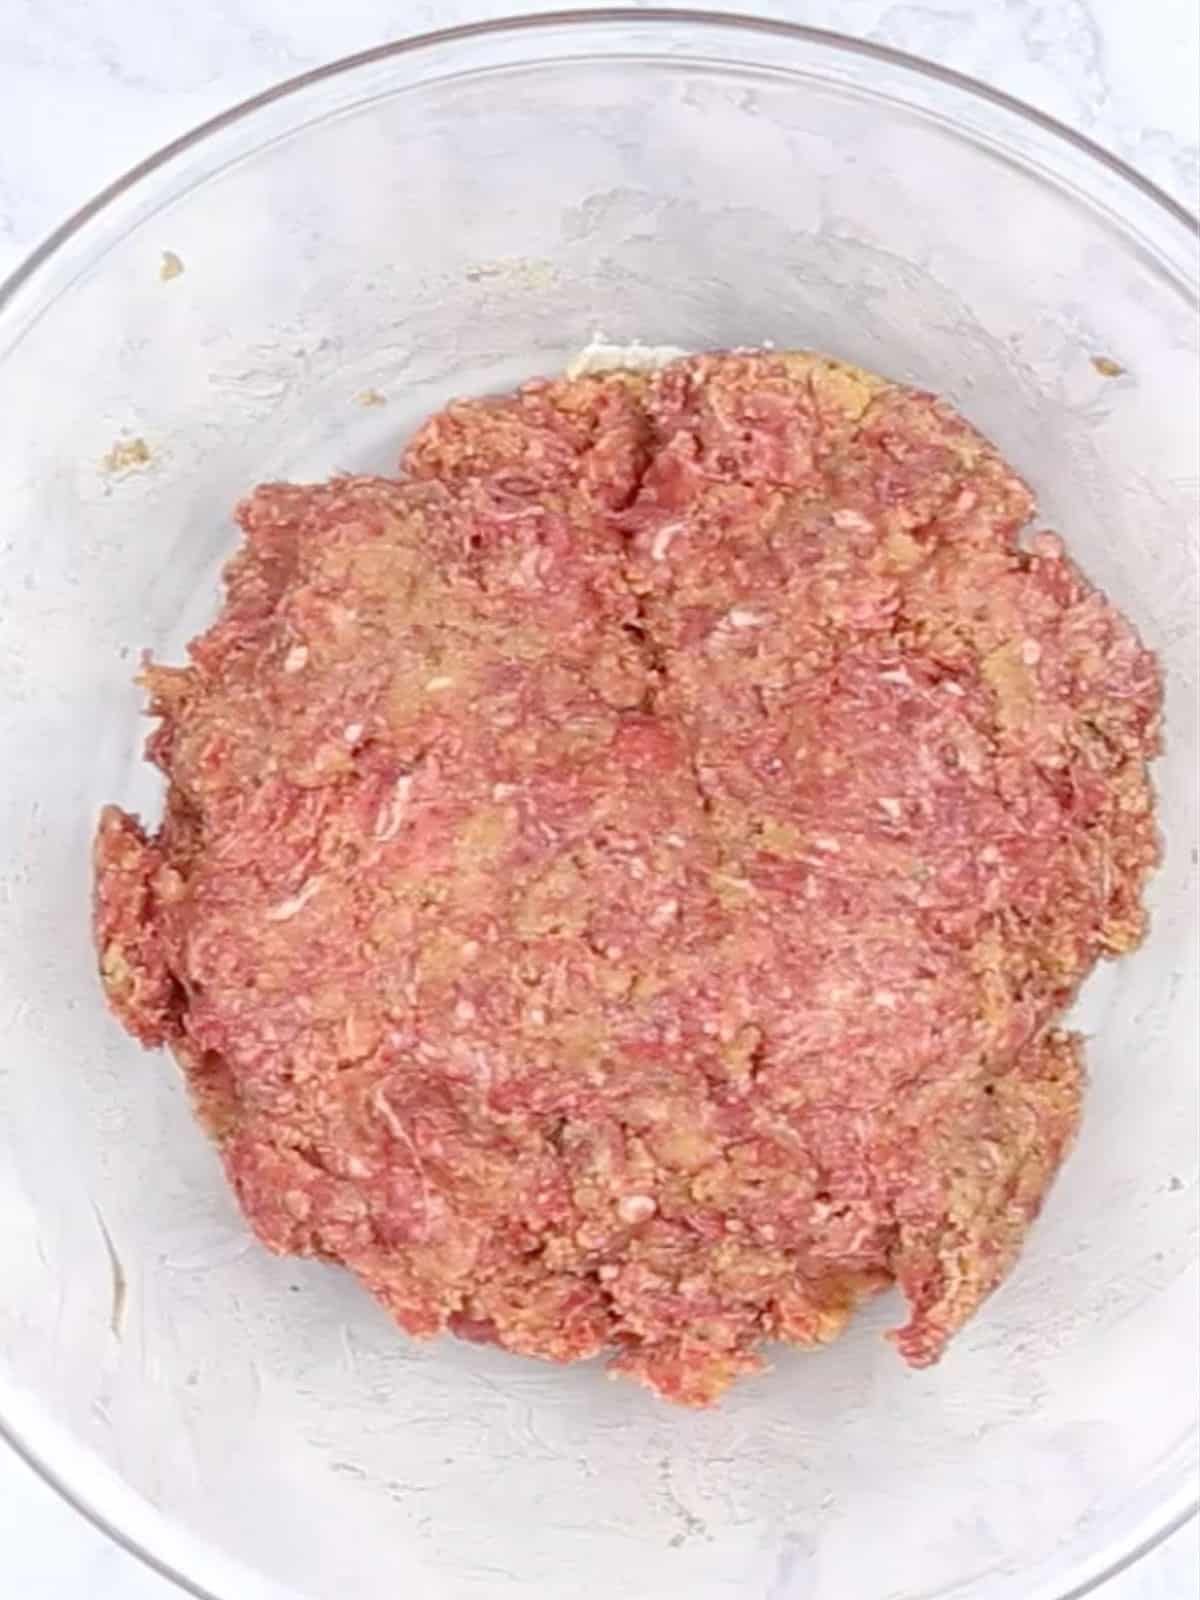 The meatloaf ingredients combined in a glass bowl.